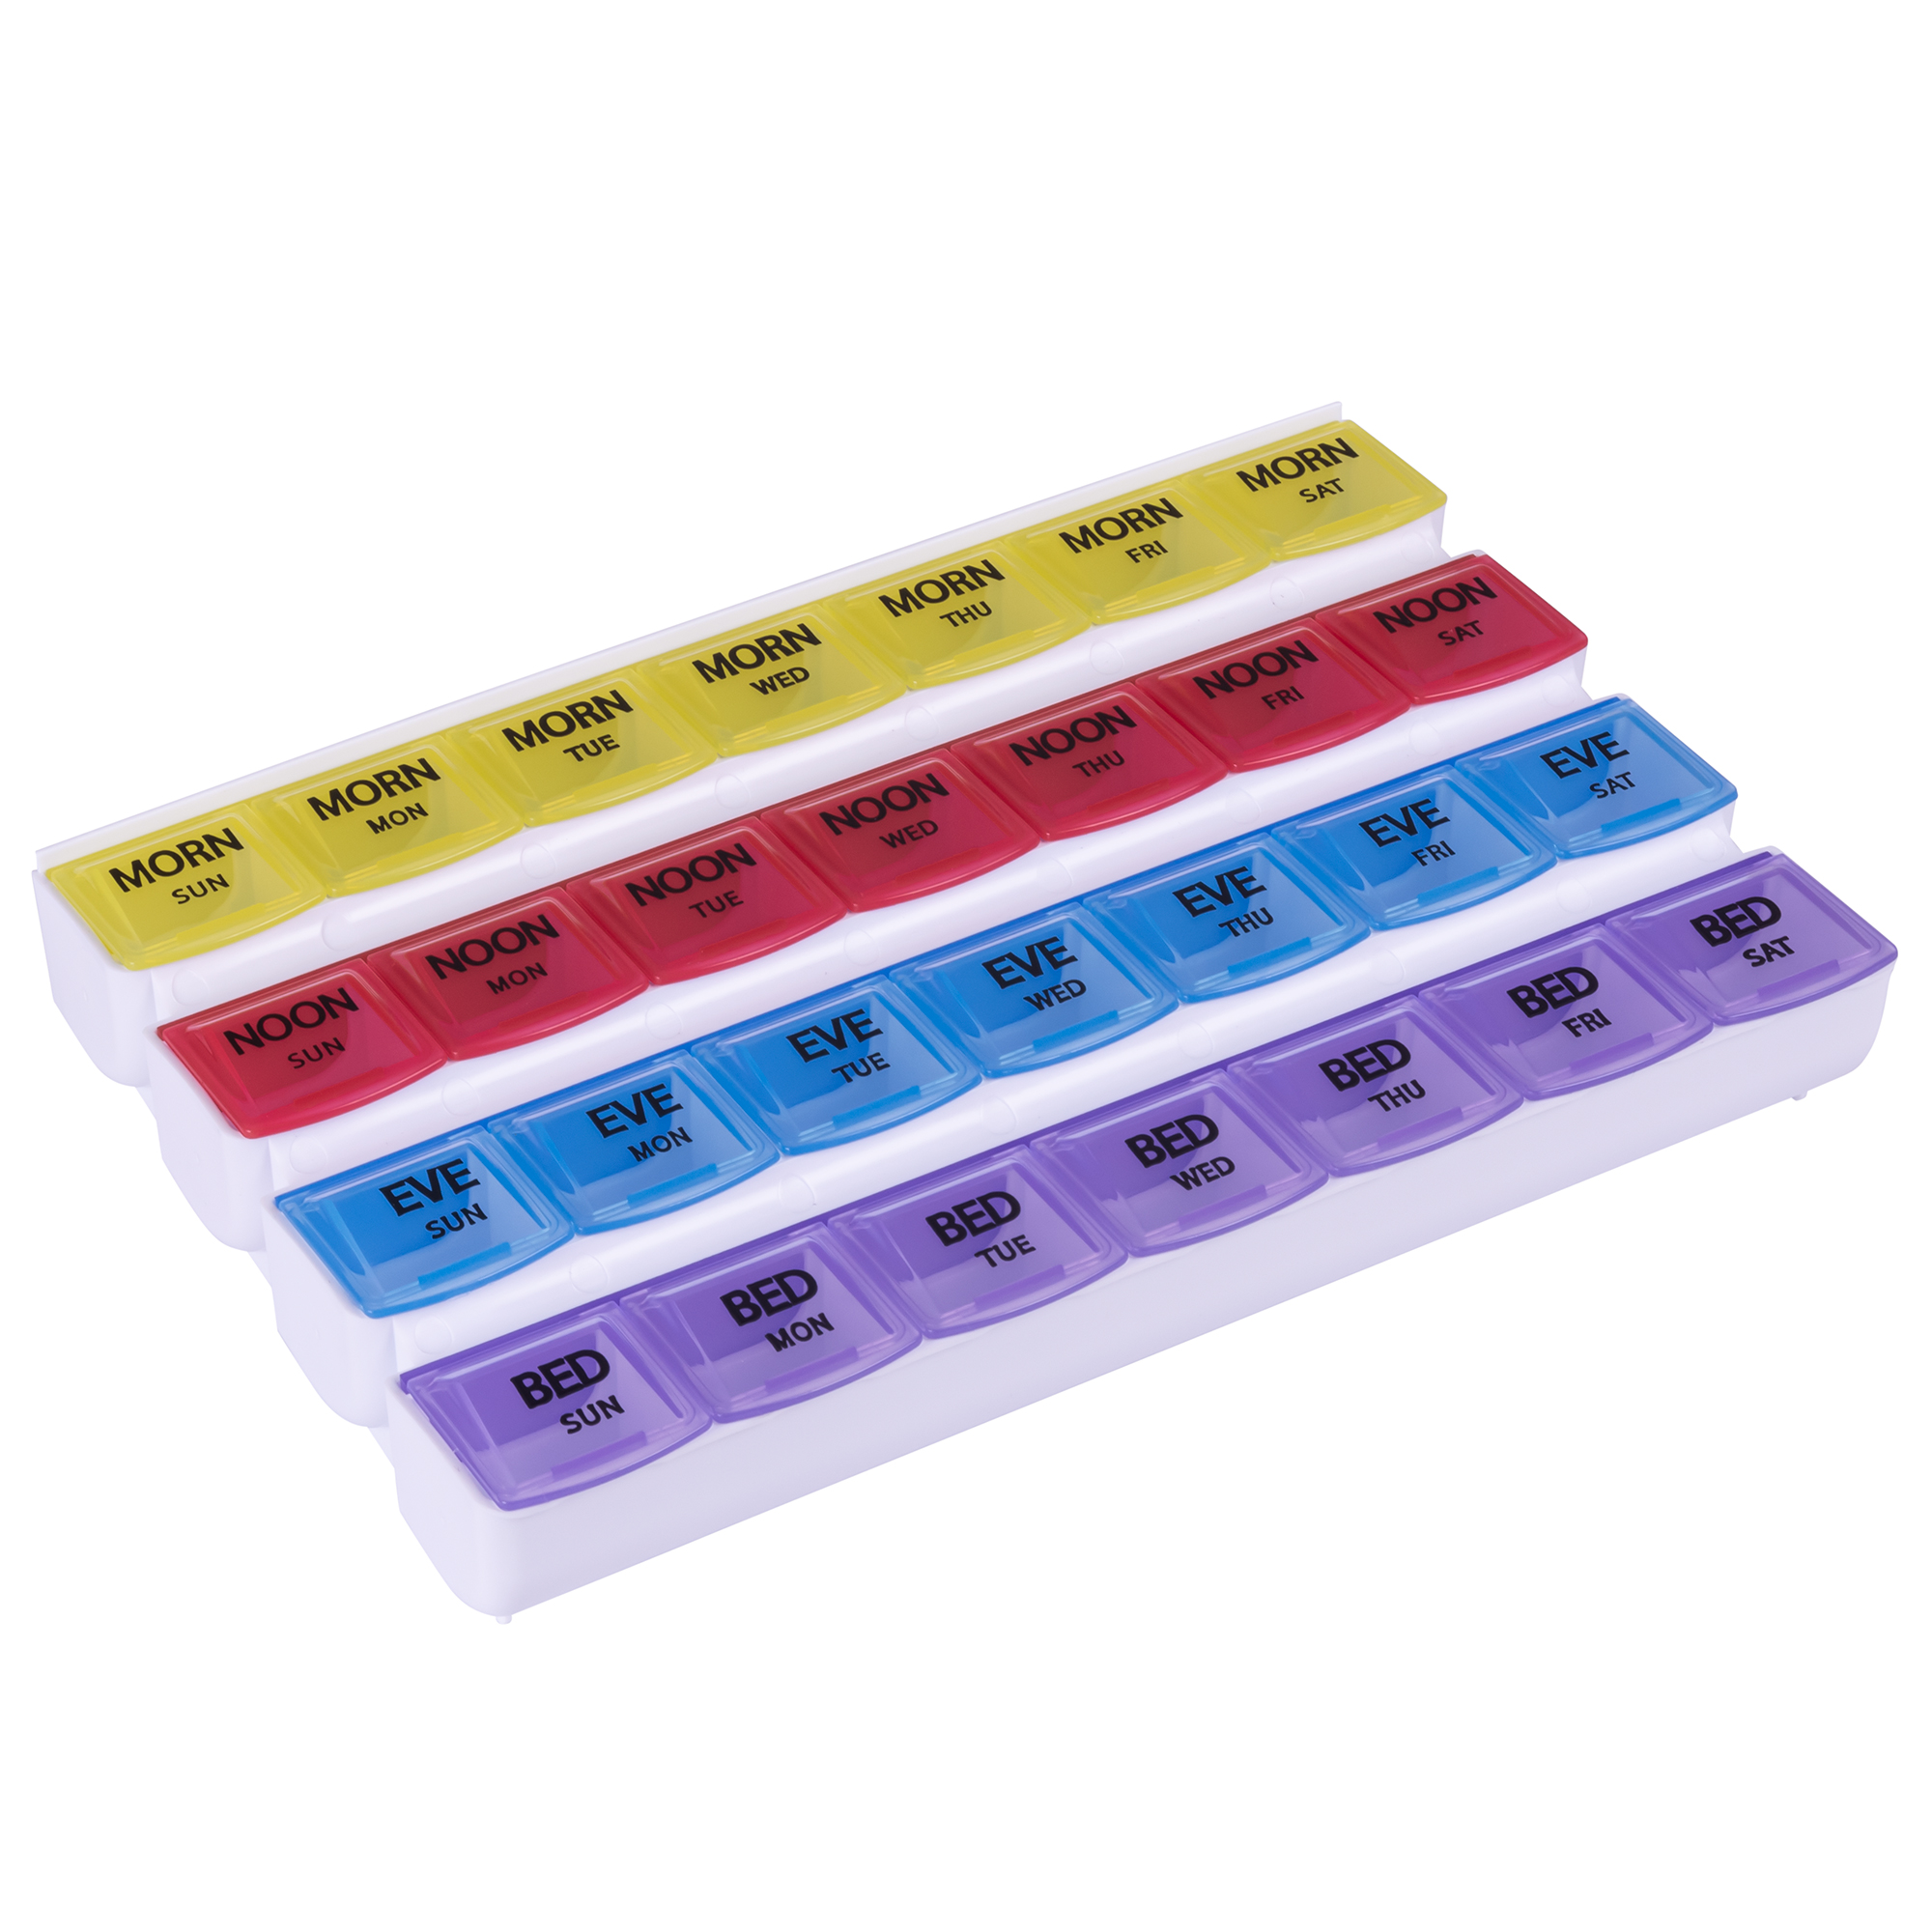 Carex Apex Four-a-Day 7-Day Pill Organizer, Medicine Box for Tablets and Vitamins, - image 1 of 8